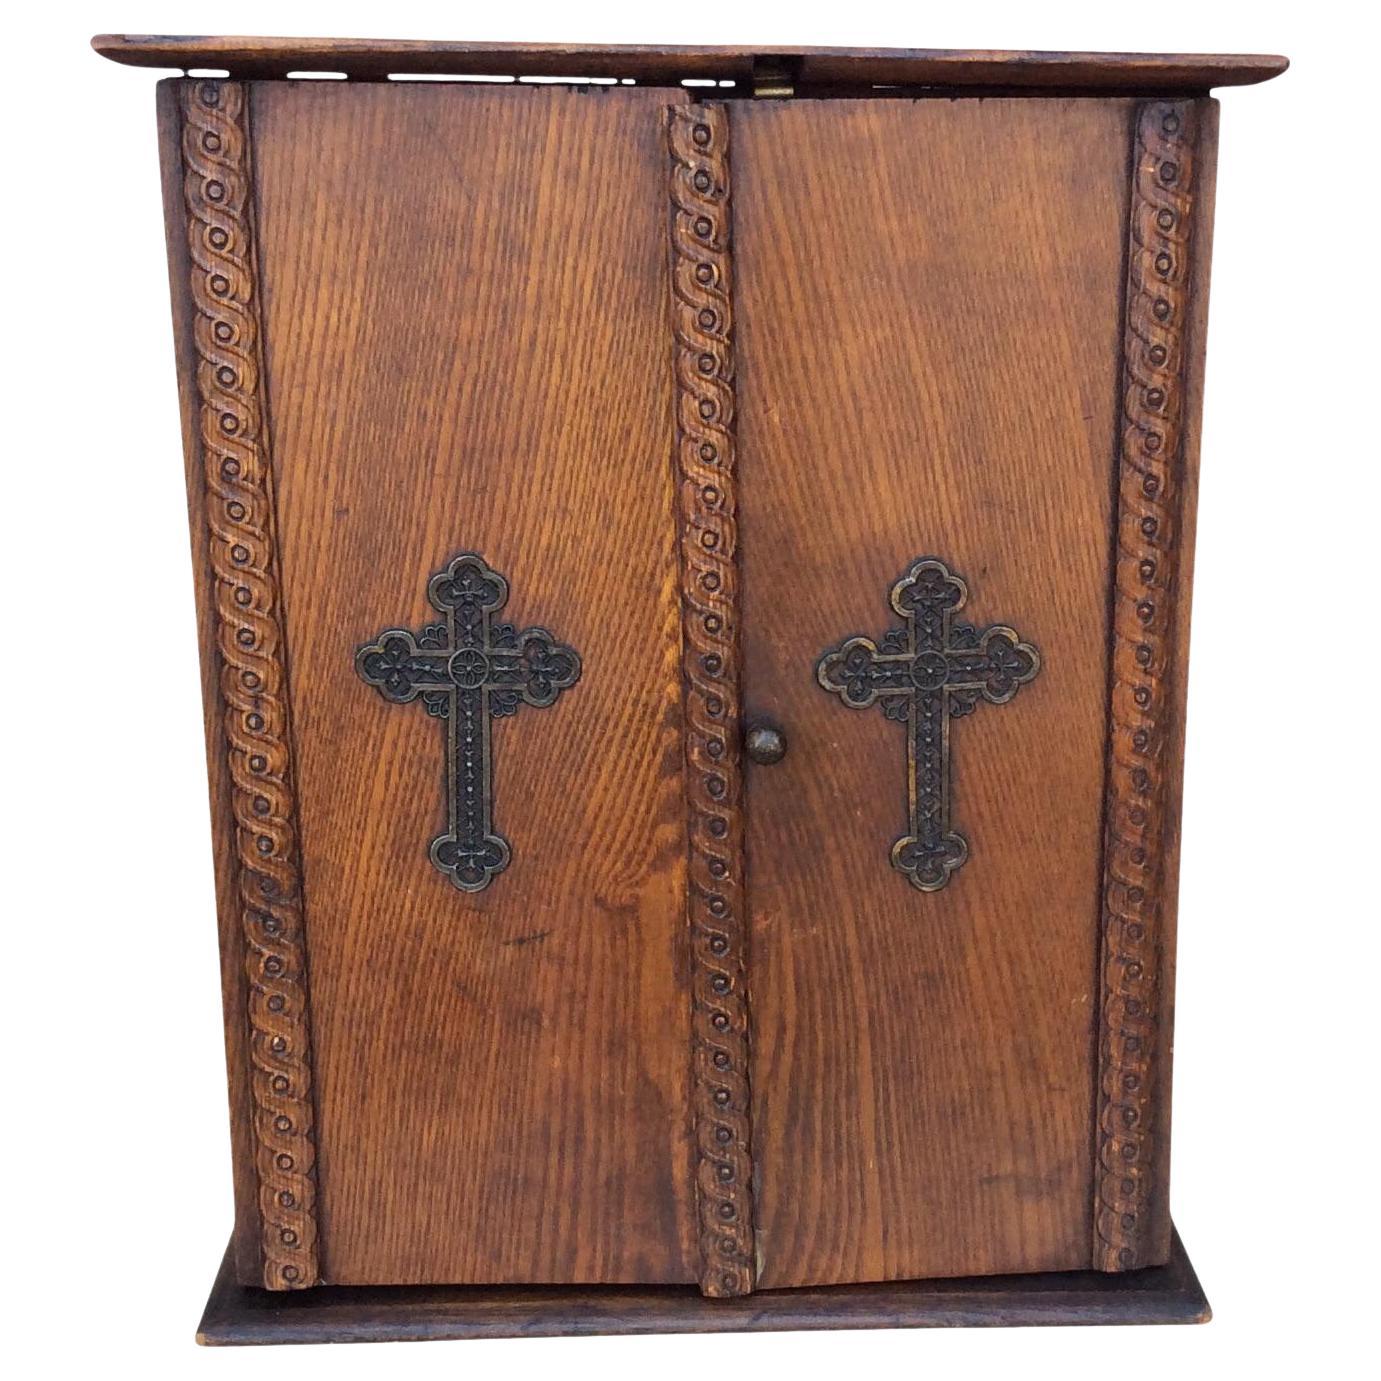 Early 20th Century Wood Viaticum Cabinet and Home Altar Box